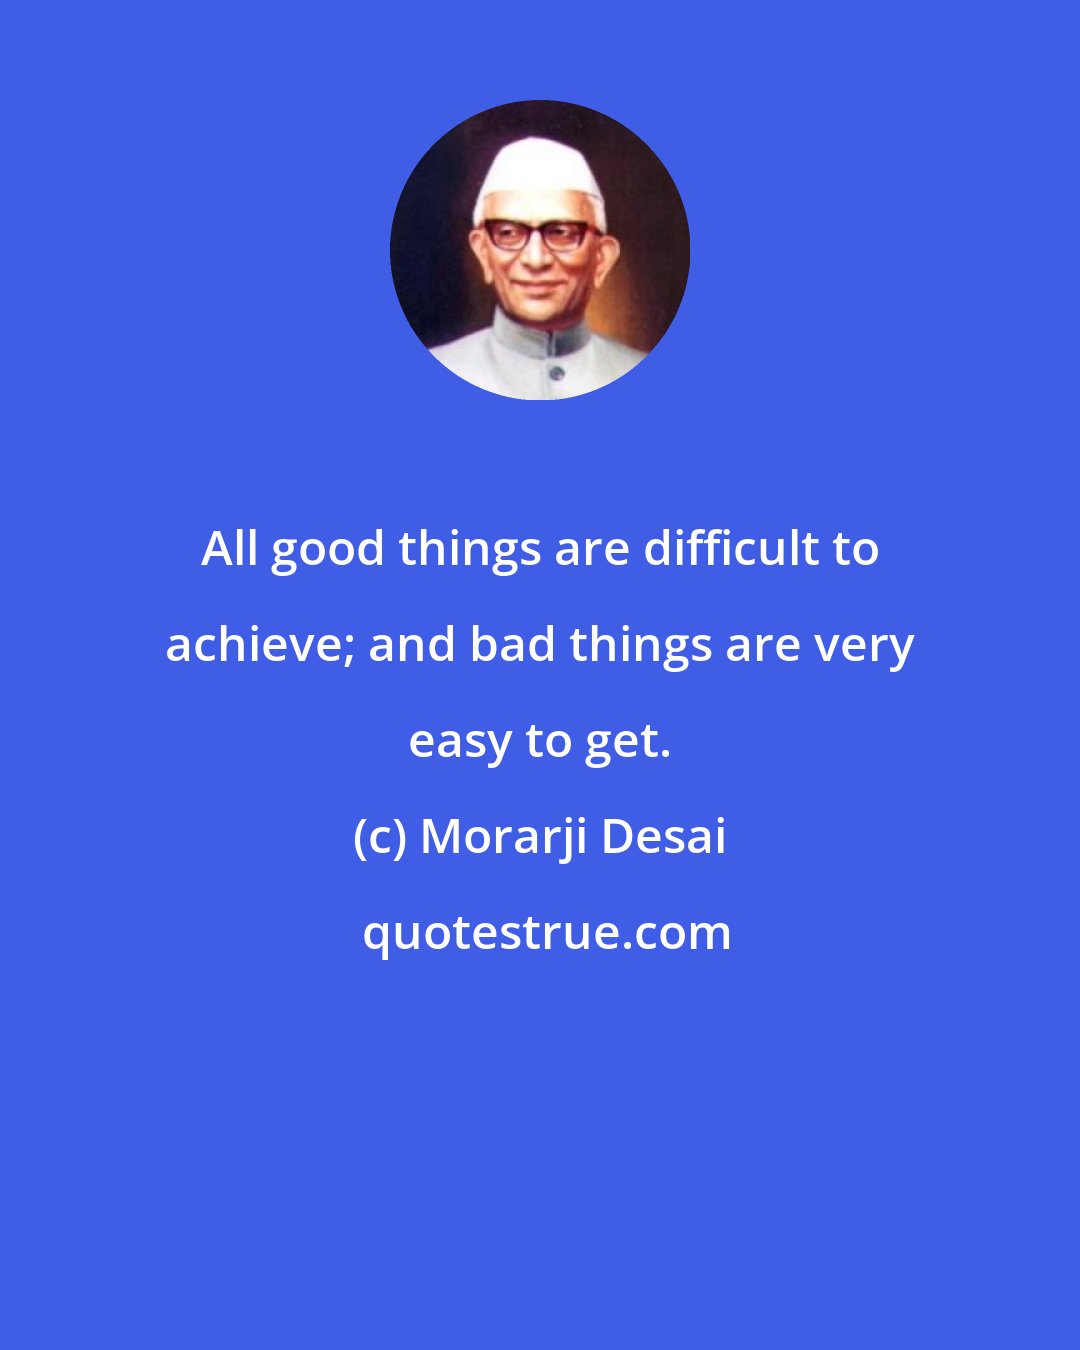 Morarji Desai: All good things are difficult to achieve; and bad things are very easy to get.